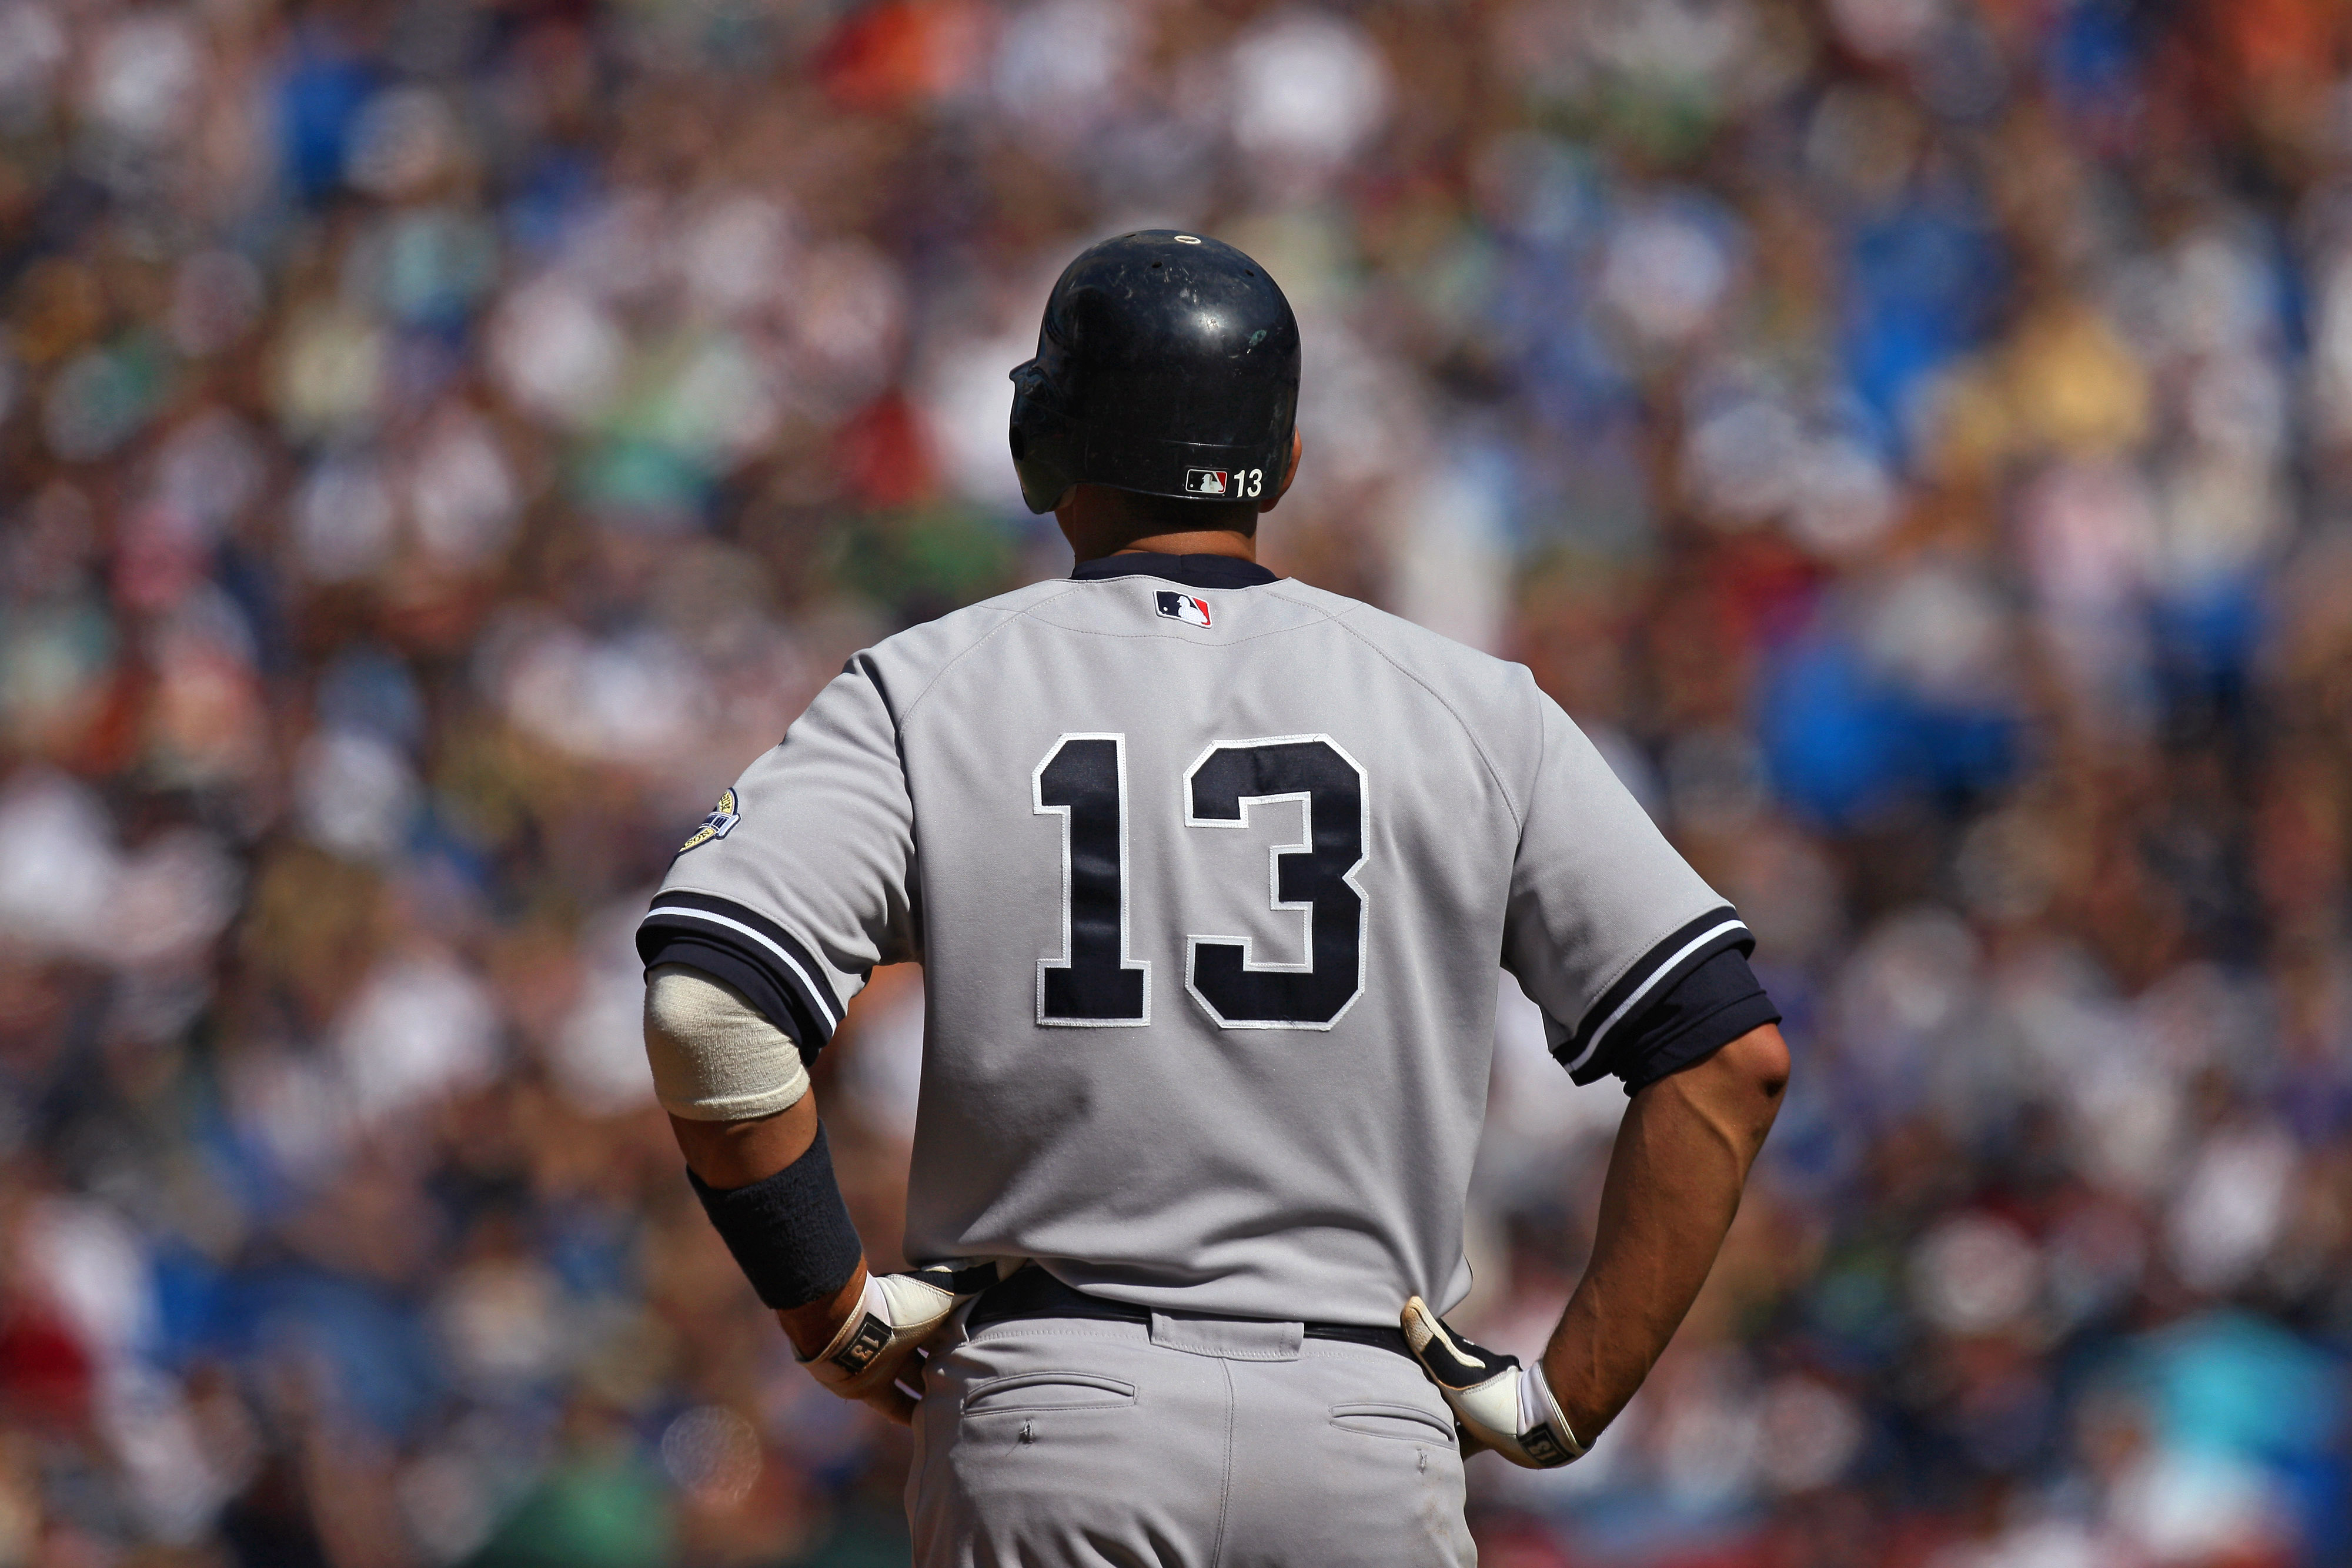 ESPN Stats & Info on X: Miguel Cabrera earned his 3,111th career